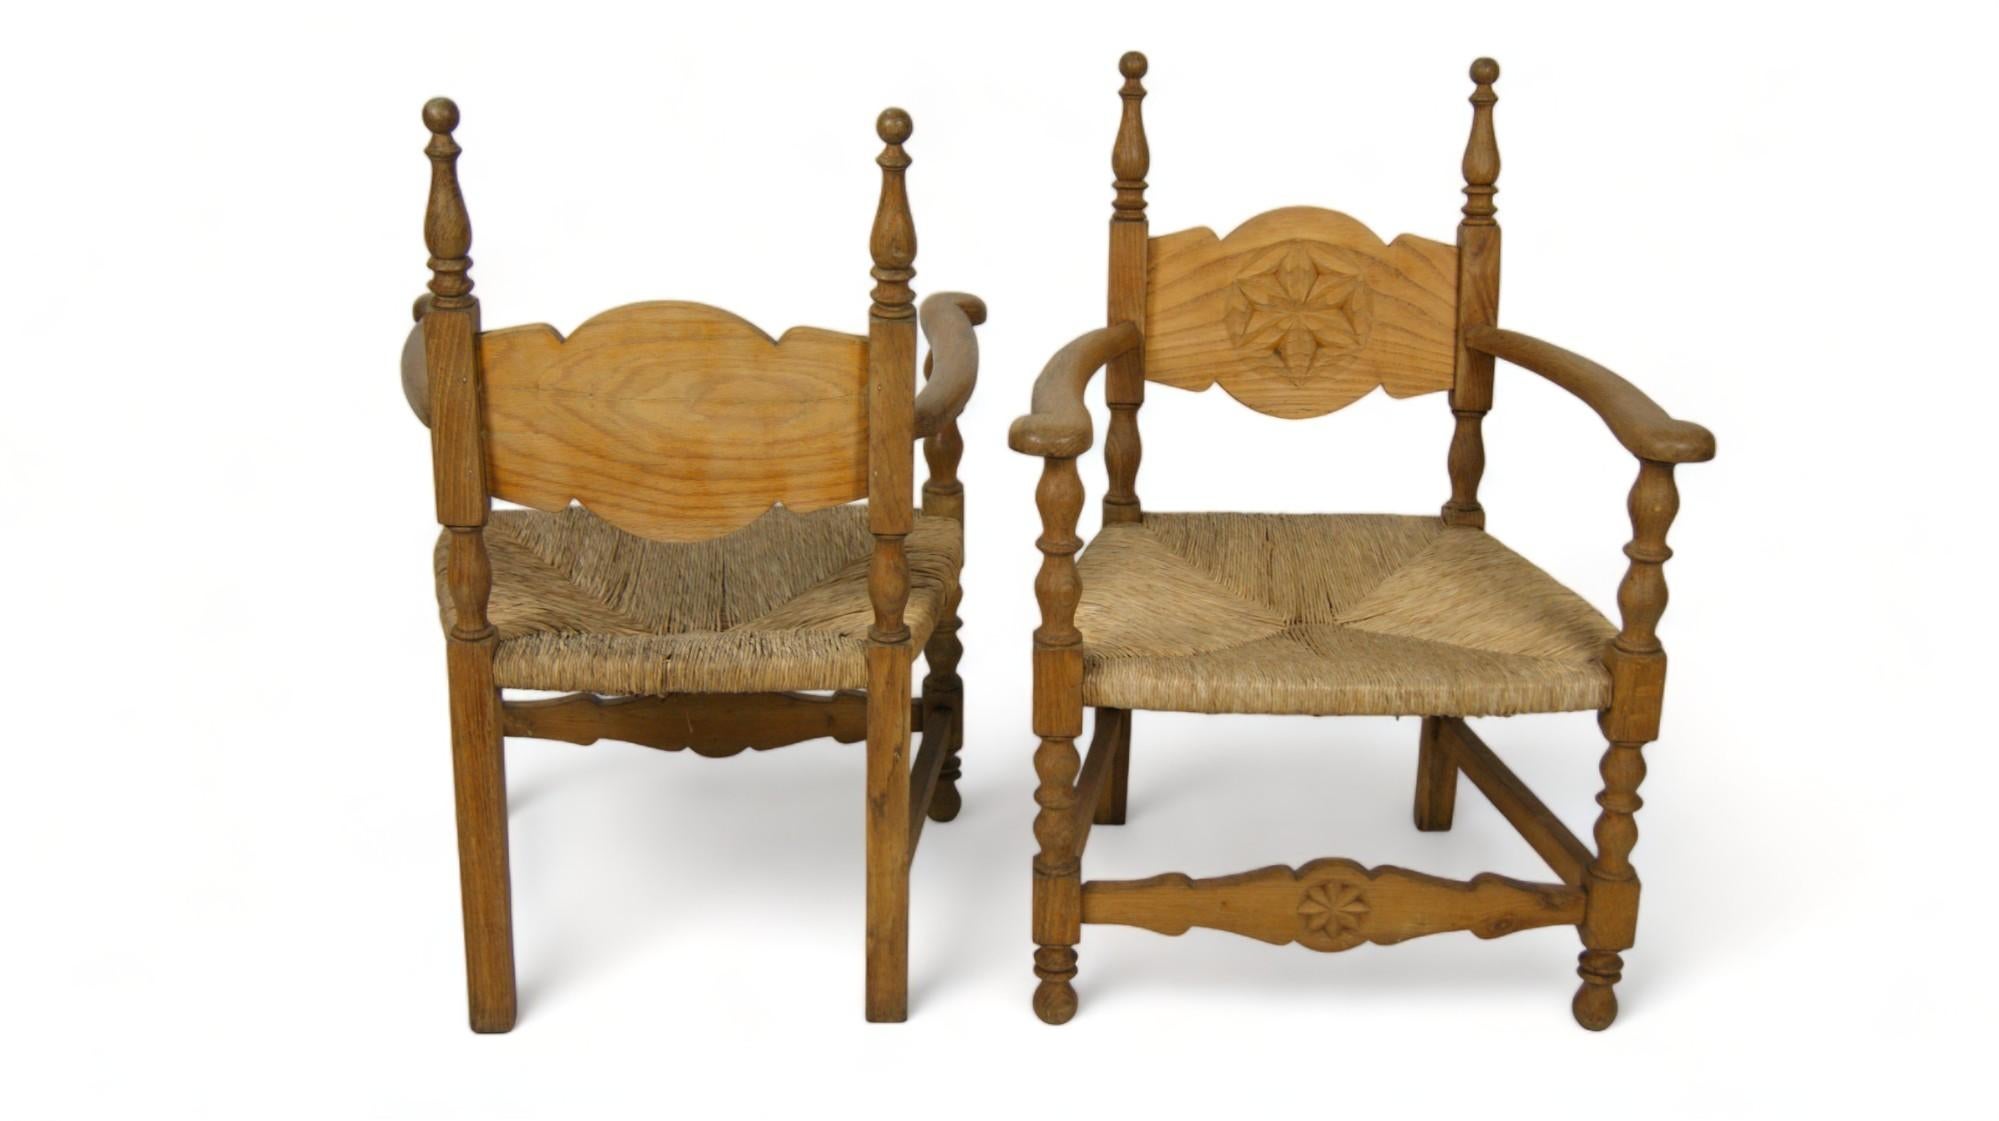 
​
1.624 / 5.000
Resultados de traducción
Resultado de traducción
The wooden armchair, hand-turned and dating back to the 1900s, is an exceptional piece that transcends time and stands as a valuable addition to any collection. This piece of